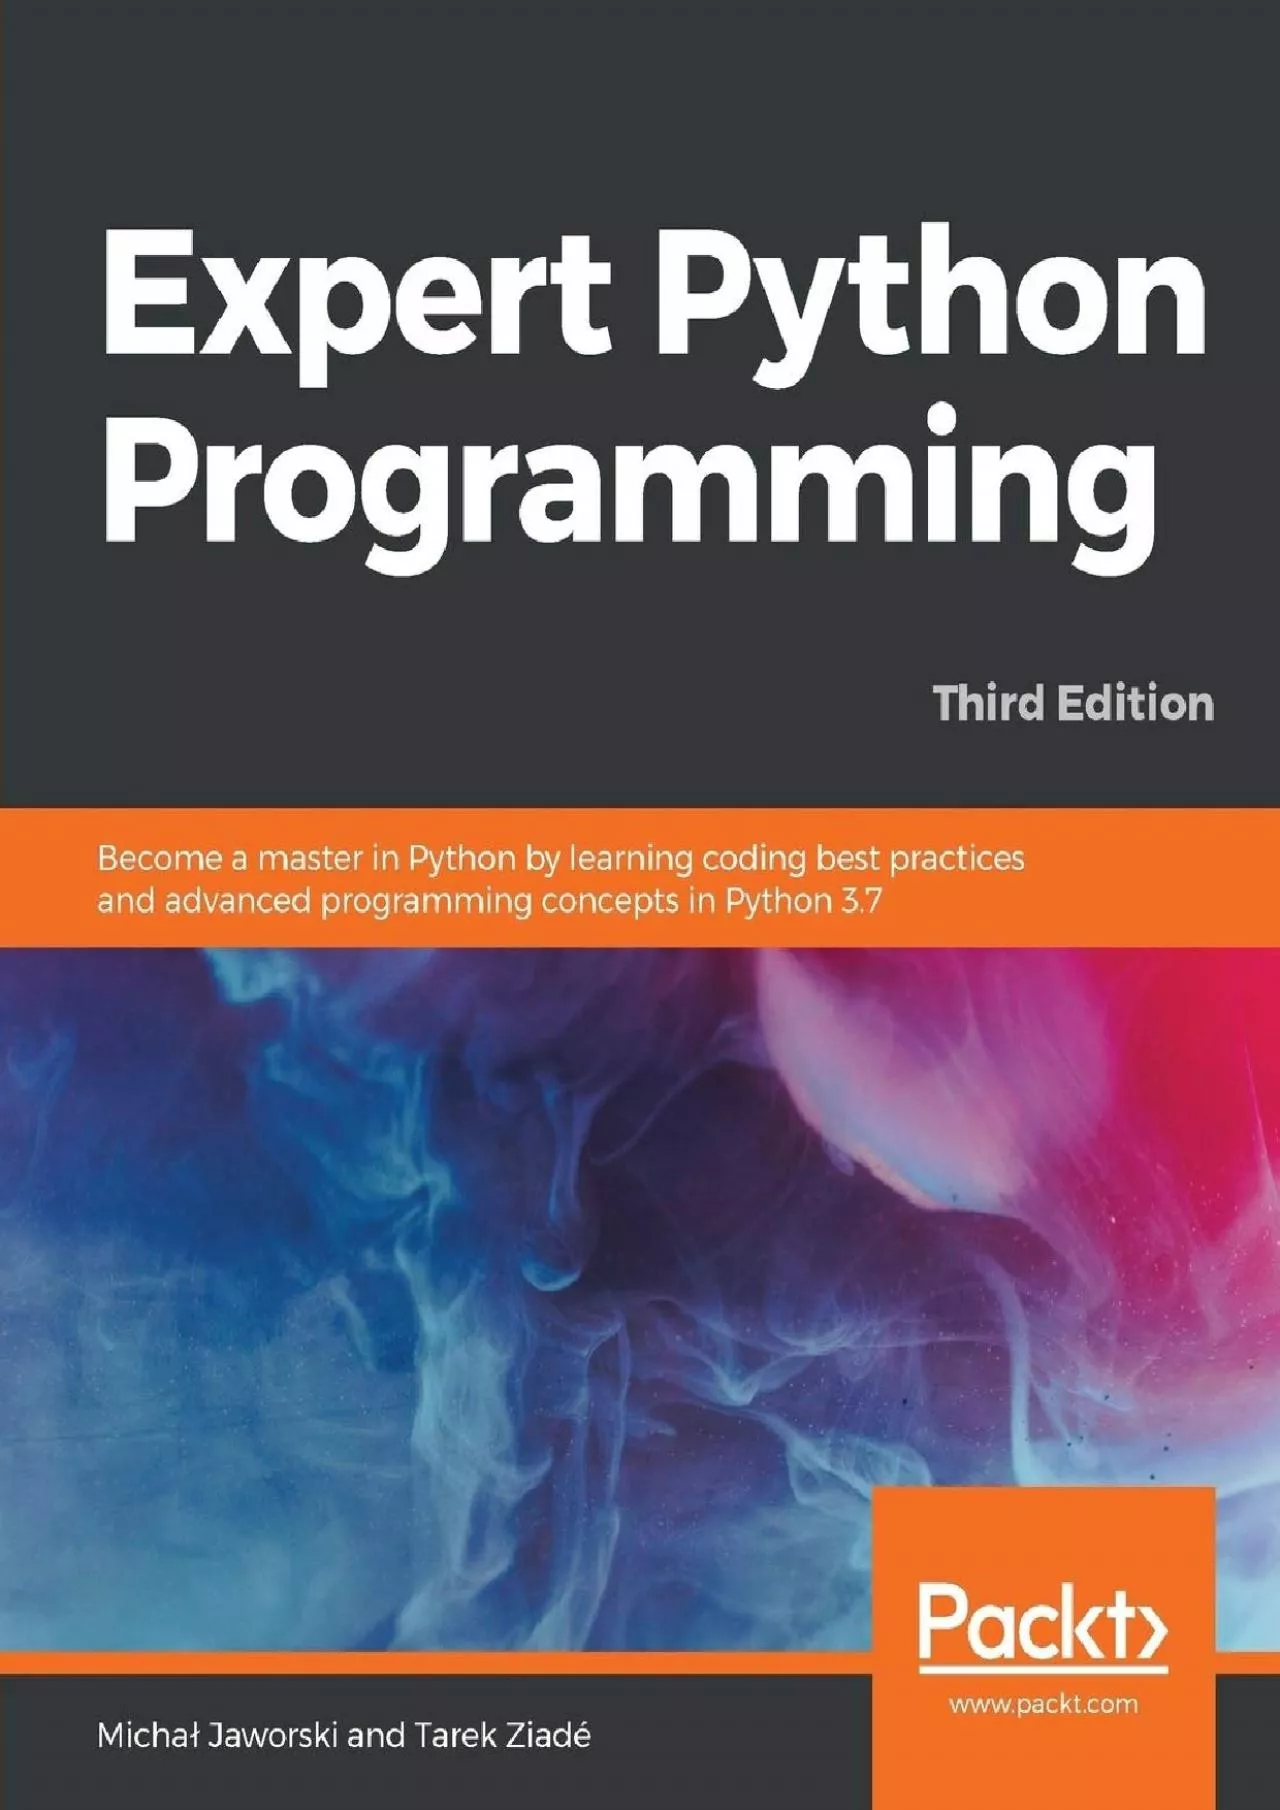 [BEST]-Expert Python Programming: Become a master in Python by learning coding best practices